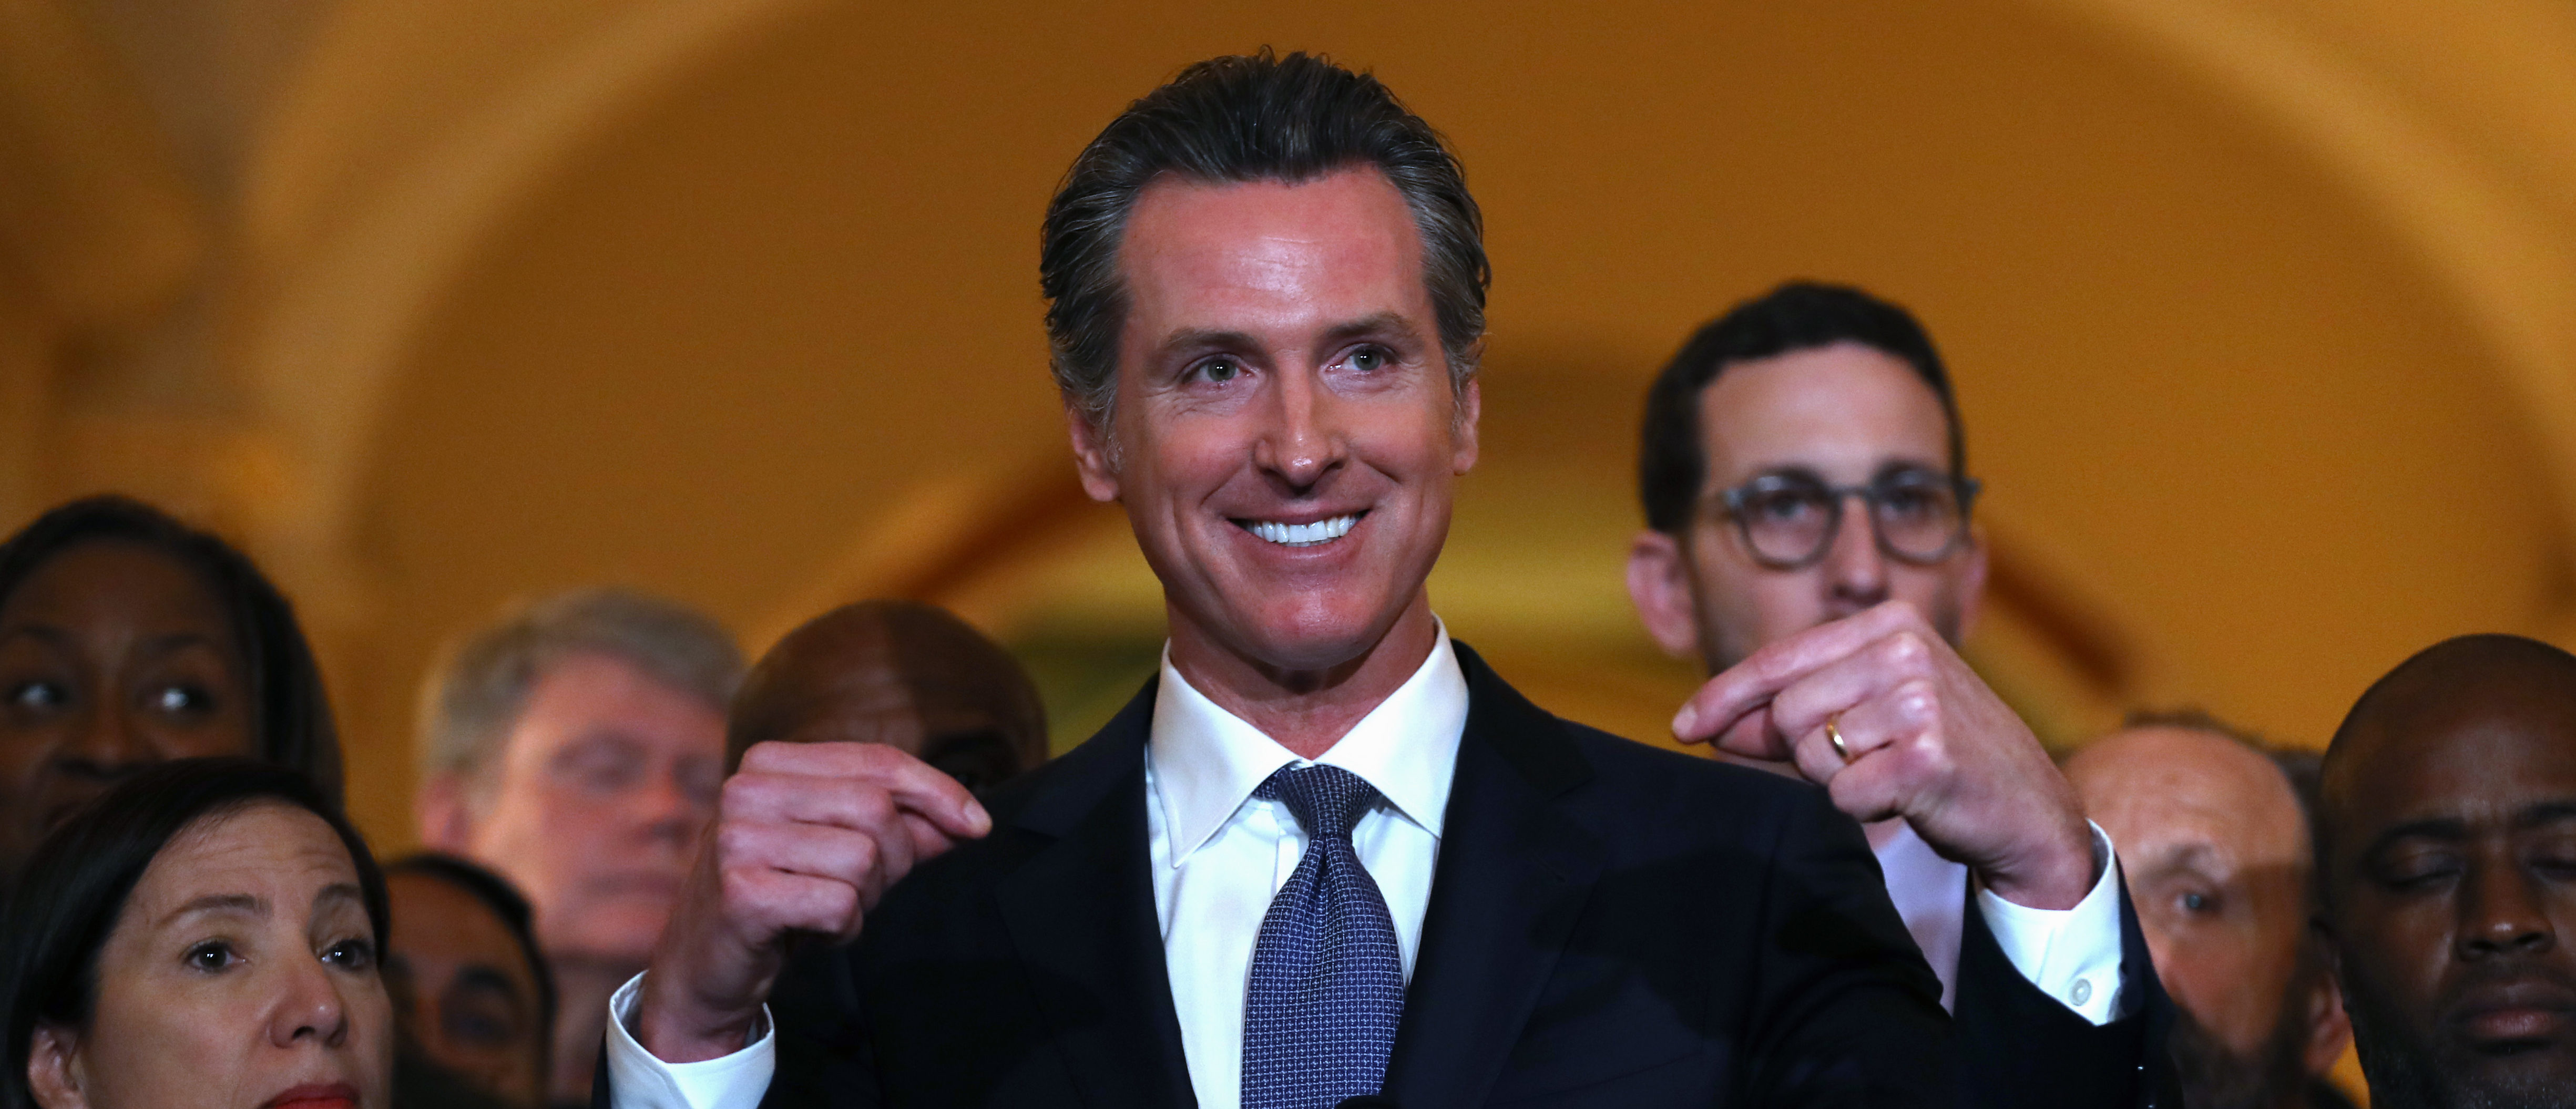 California Gov. Gavin Newsom speaks during a news conference at the California State Capitol on March 13, 2019 in Sacramento, California. (Justin Sullivan/Getty Images)